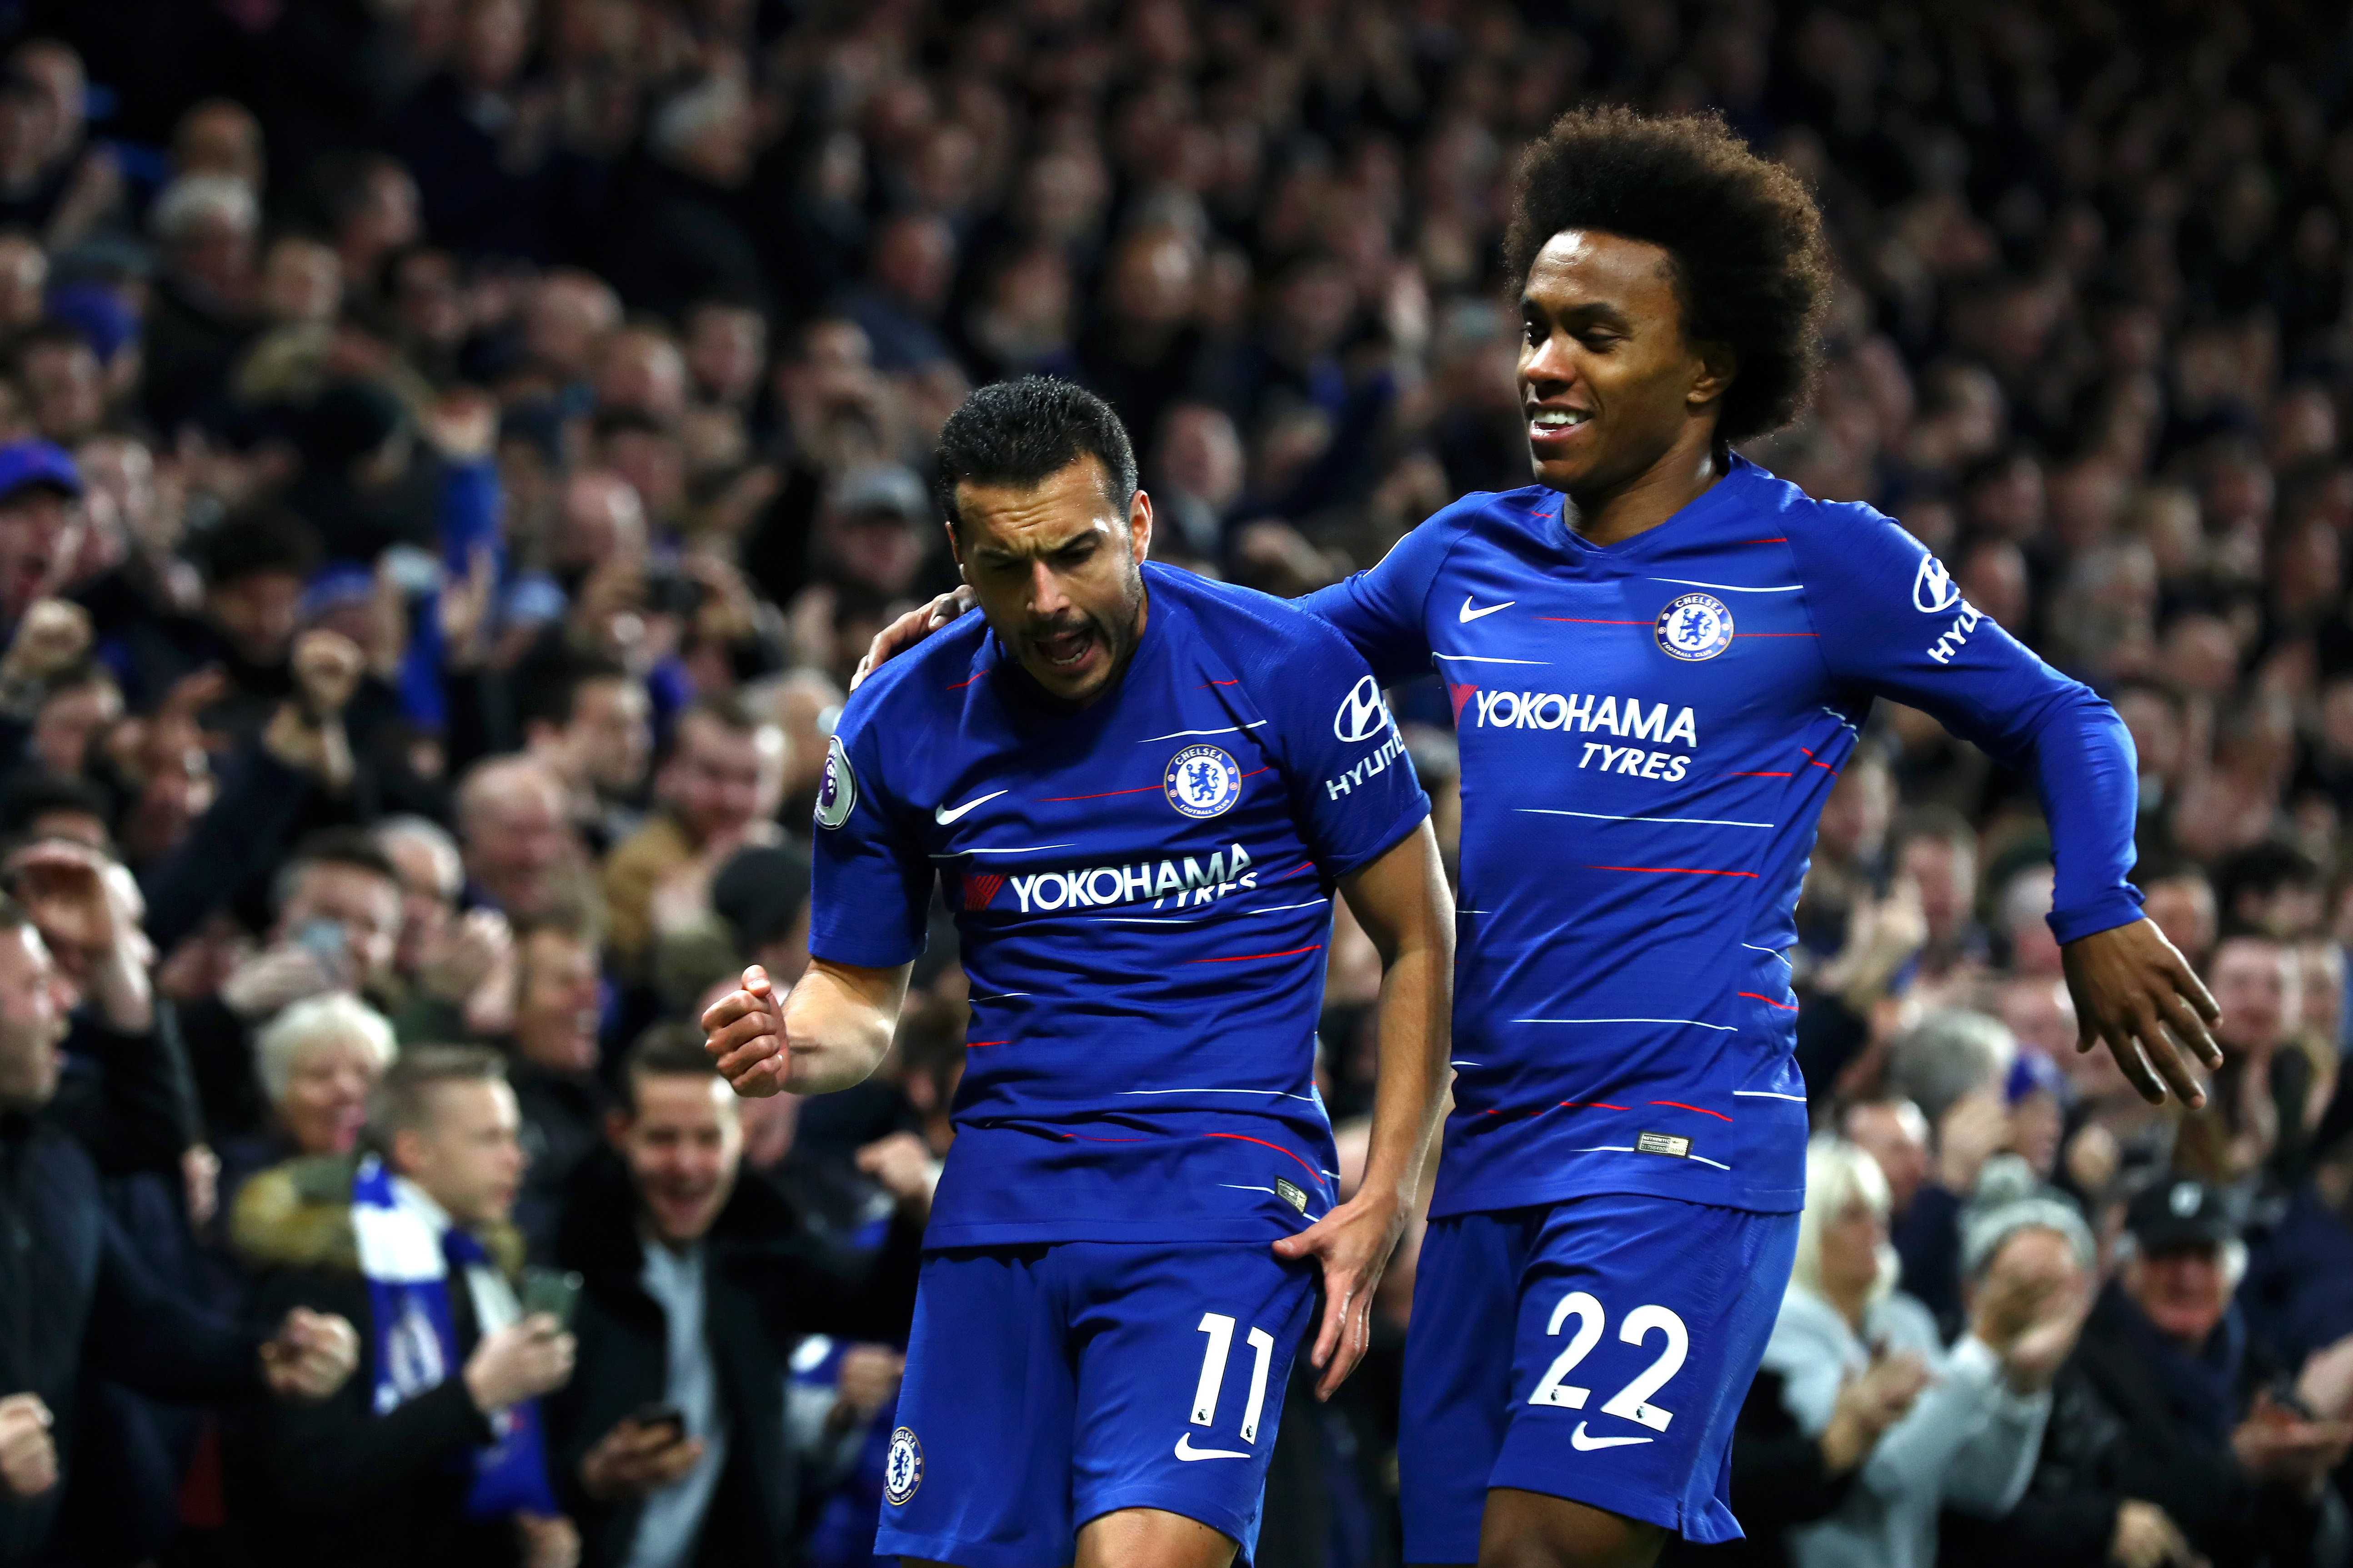 LONDON, ENGLAND - JANUARY 12:  Pedro of Chelsea celebrates with teammate Willian after scoring his team's first goal  during the Premier League match between Chelsea FC and Newcastle United at Stamford Bridge on January 12, 2019 in London, United Kingdom.  (Photo by Clive Rose/Getty Images)